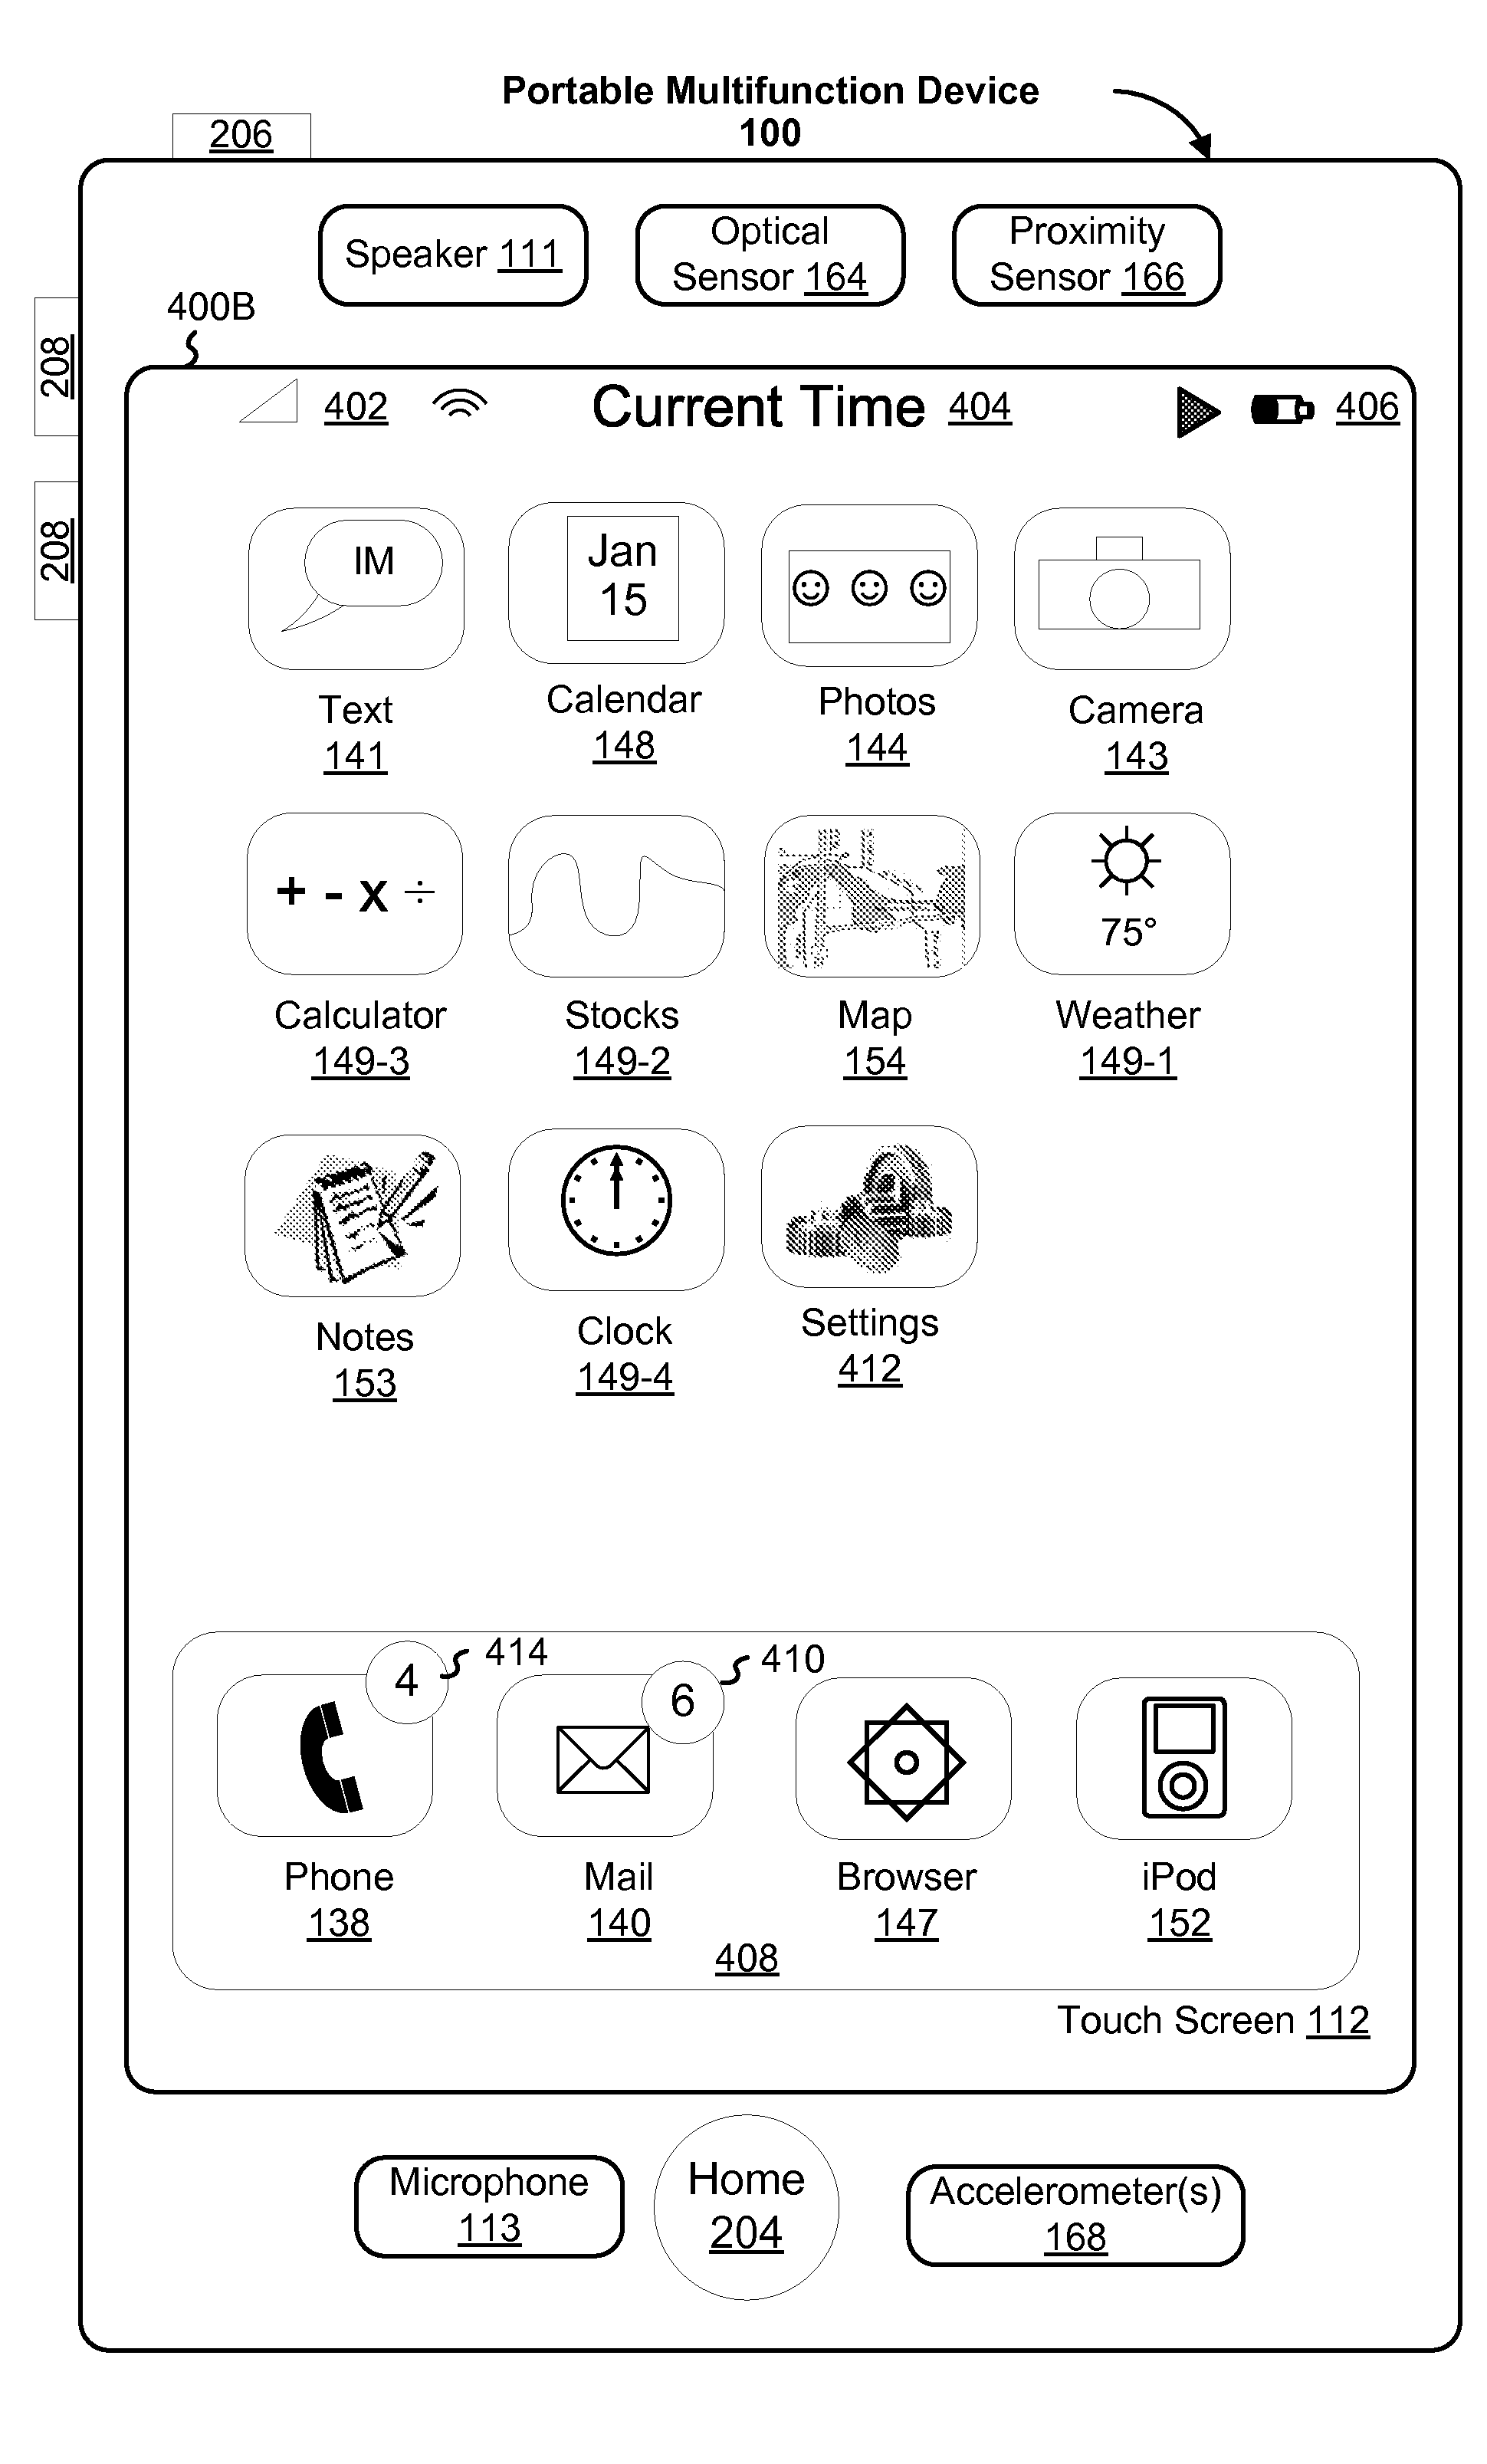 Portable Multifunction Device, Method, and Graphical User Interface for Adjusting an Insertion Point Marker